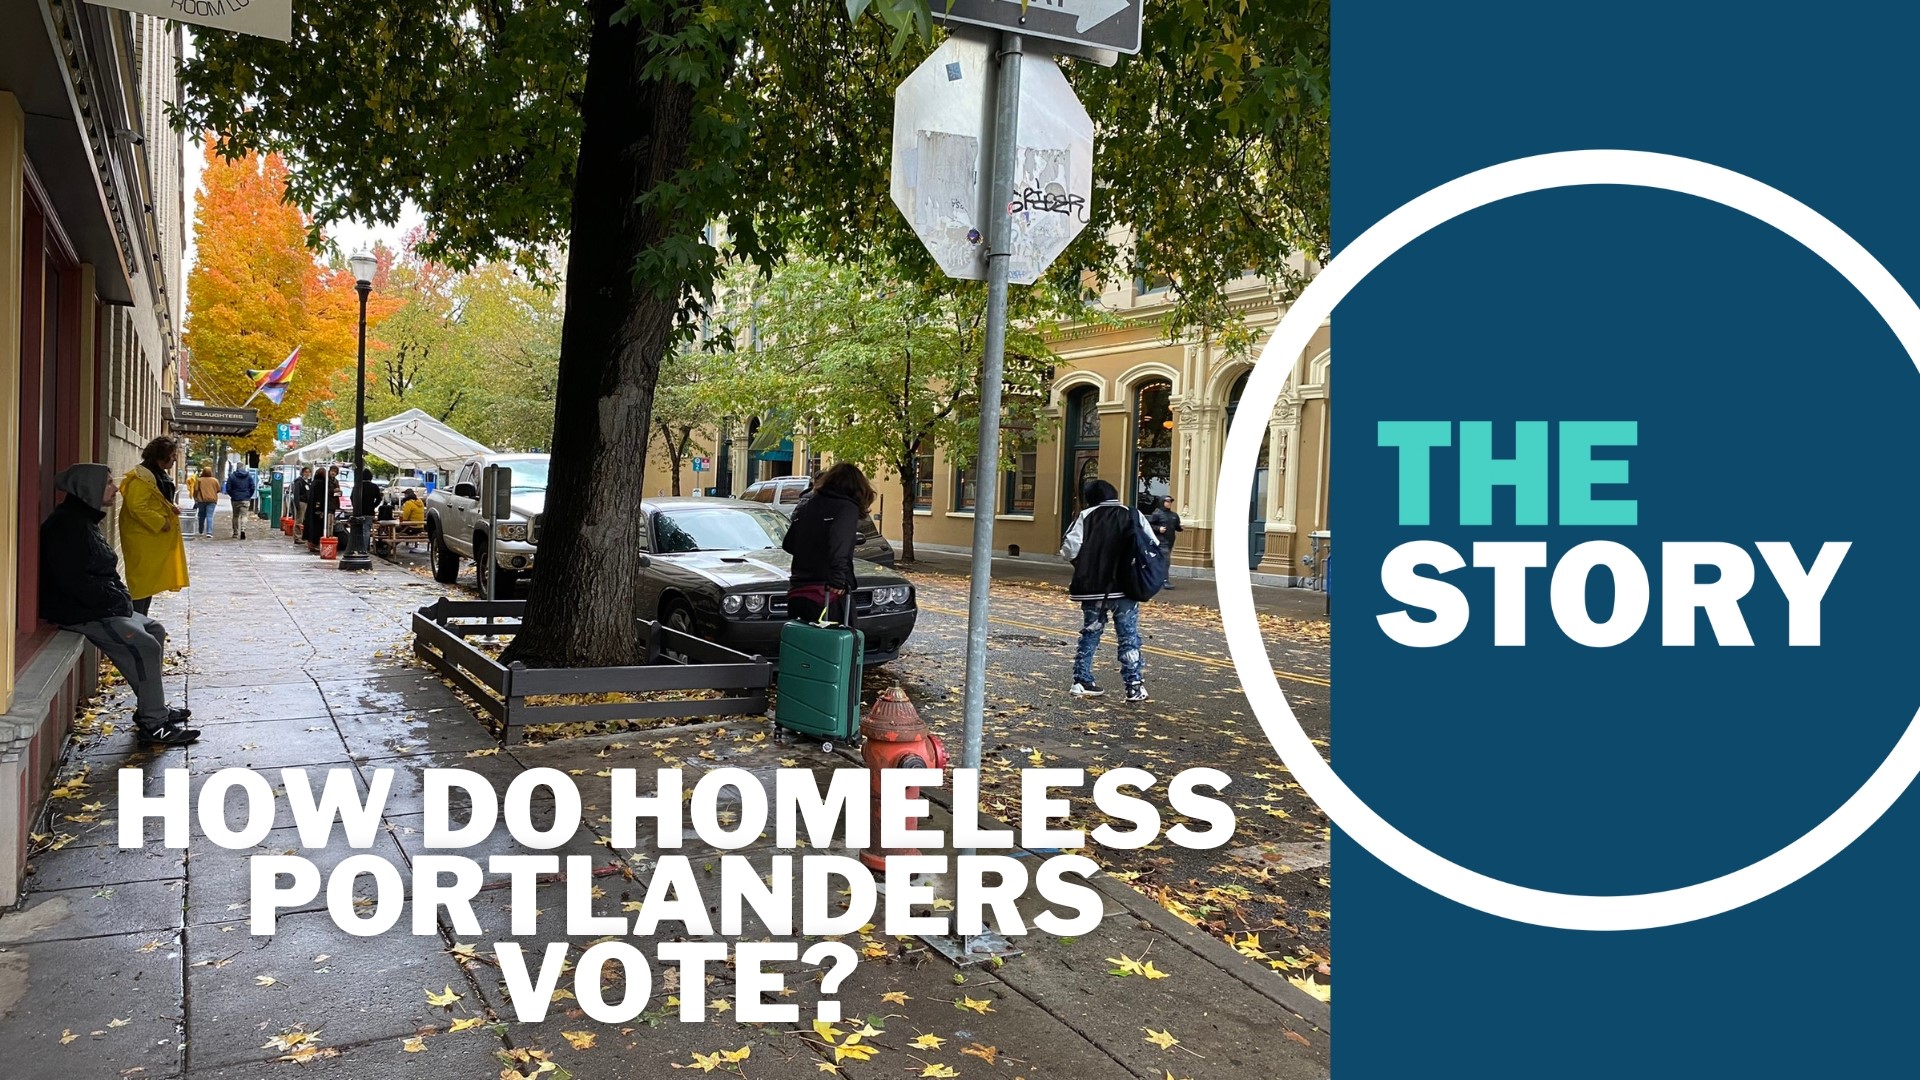 Street Roots provides a mailing address and information on candidates so that homeless people can pick up and fill out their ballot.